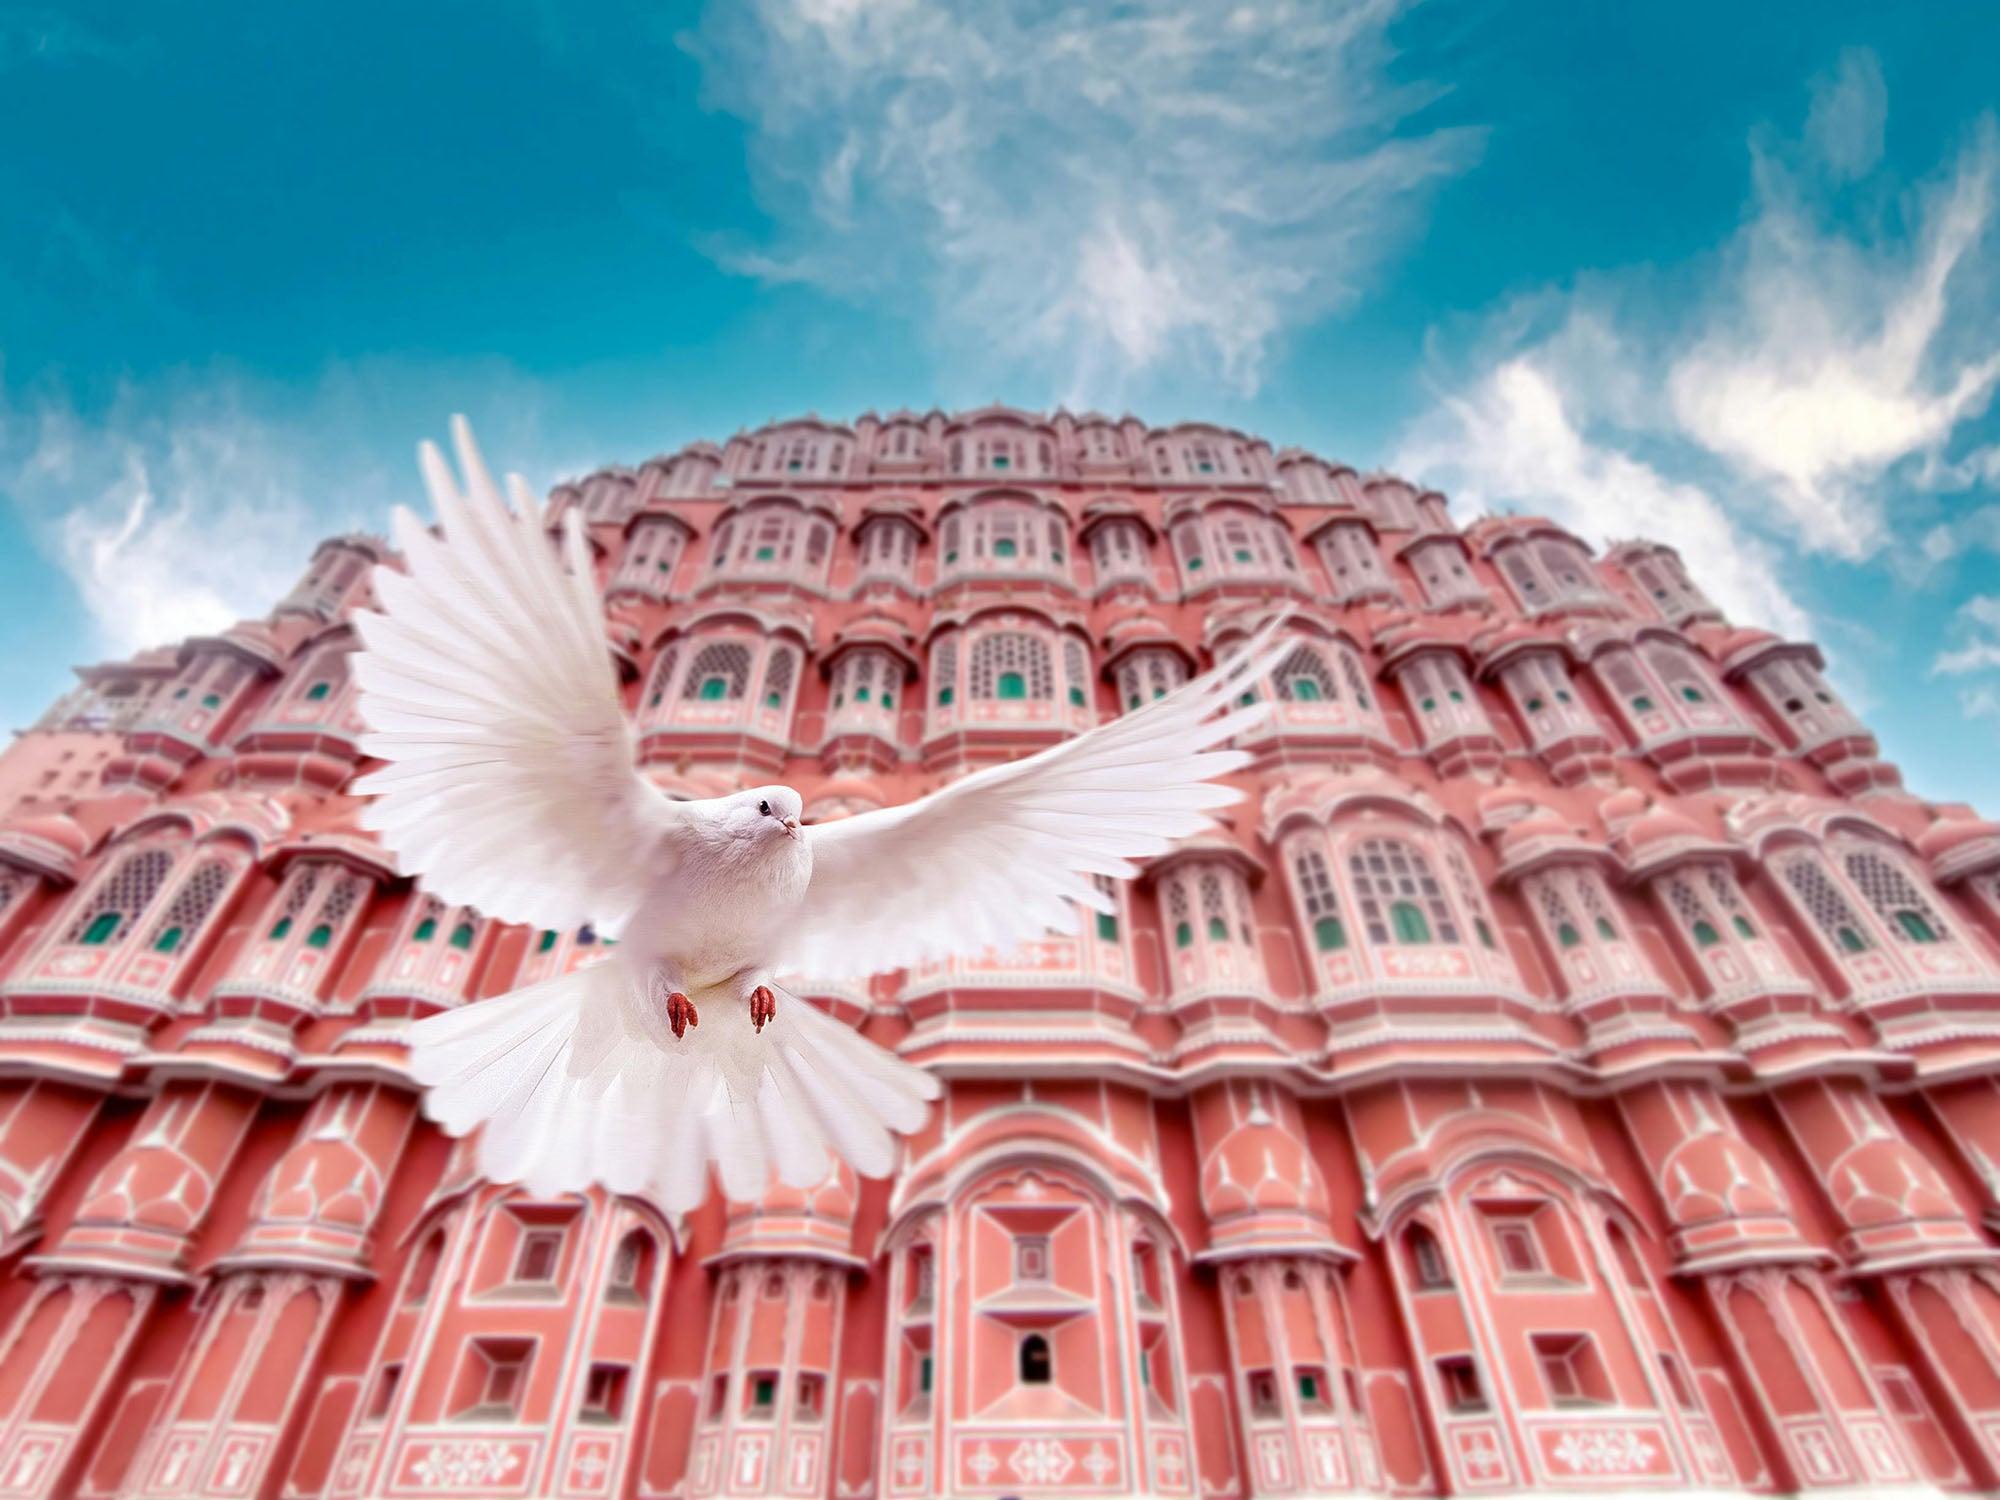 While dove flying in front of Hawa Mahal Palace, Jaipur, India